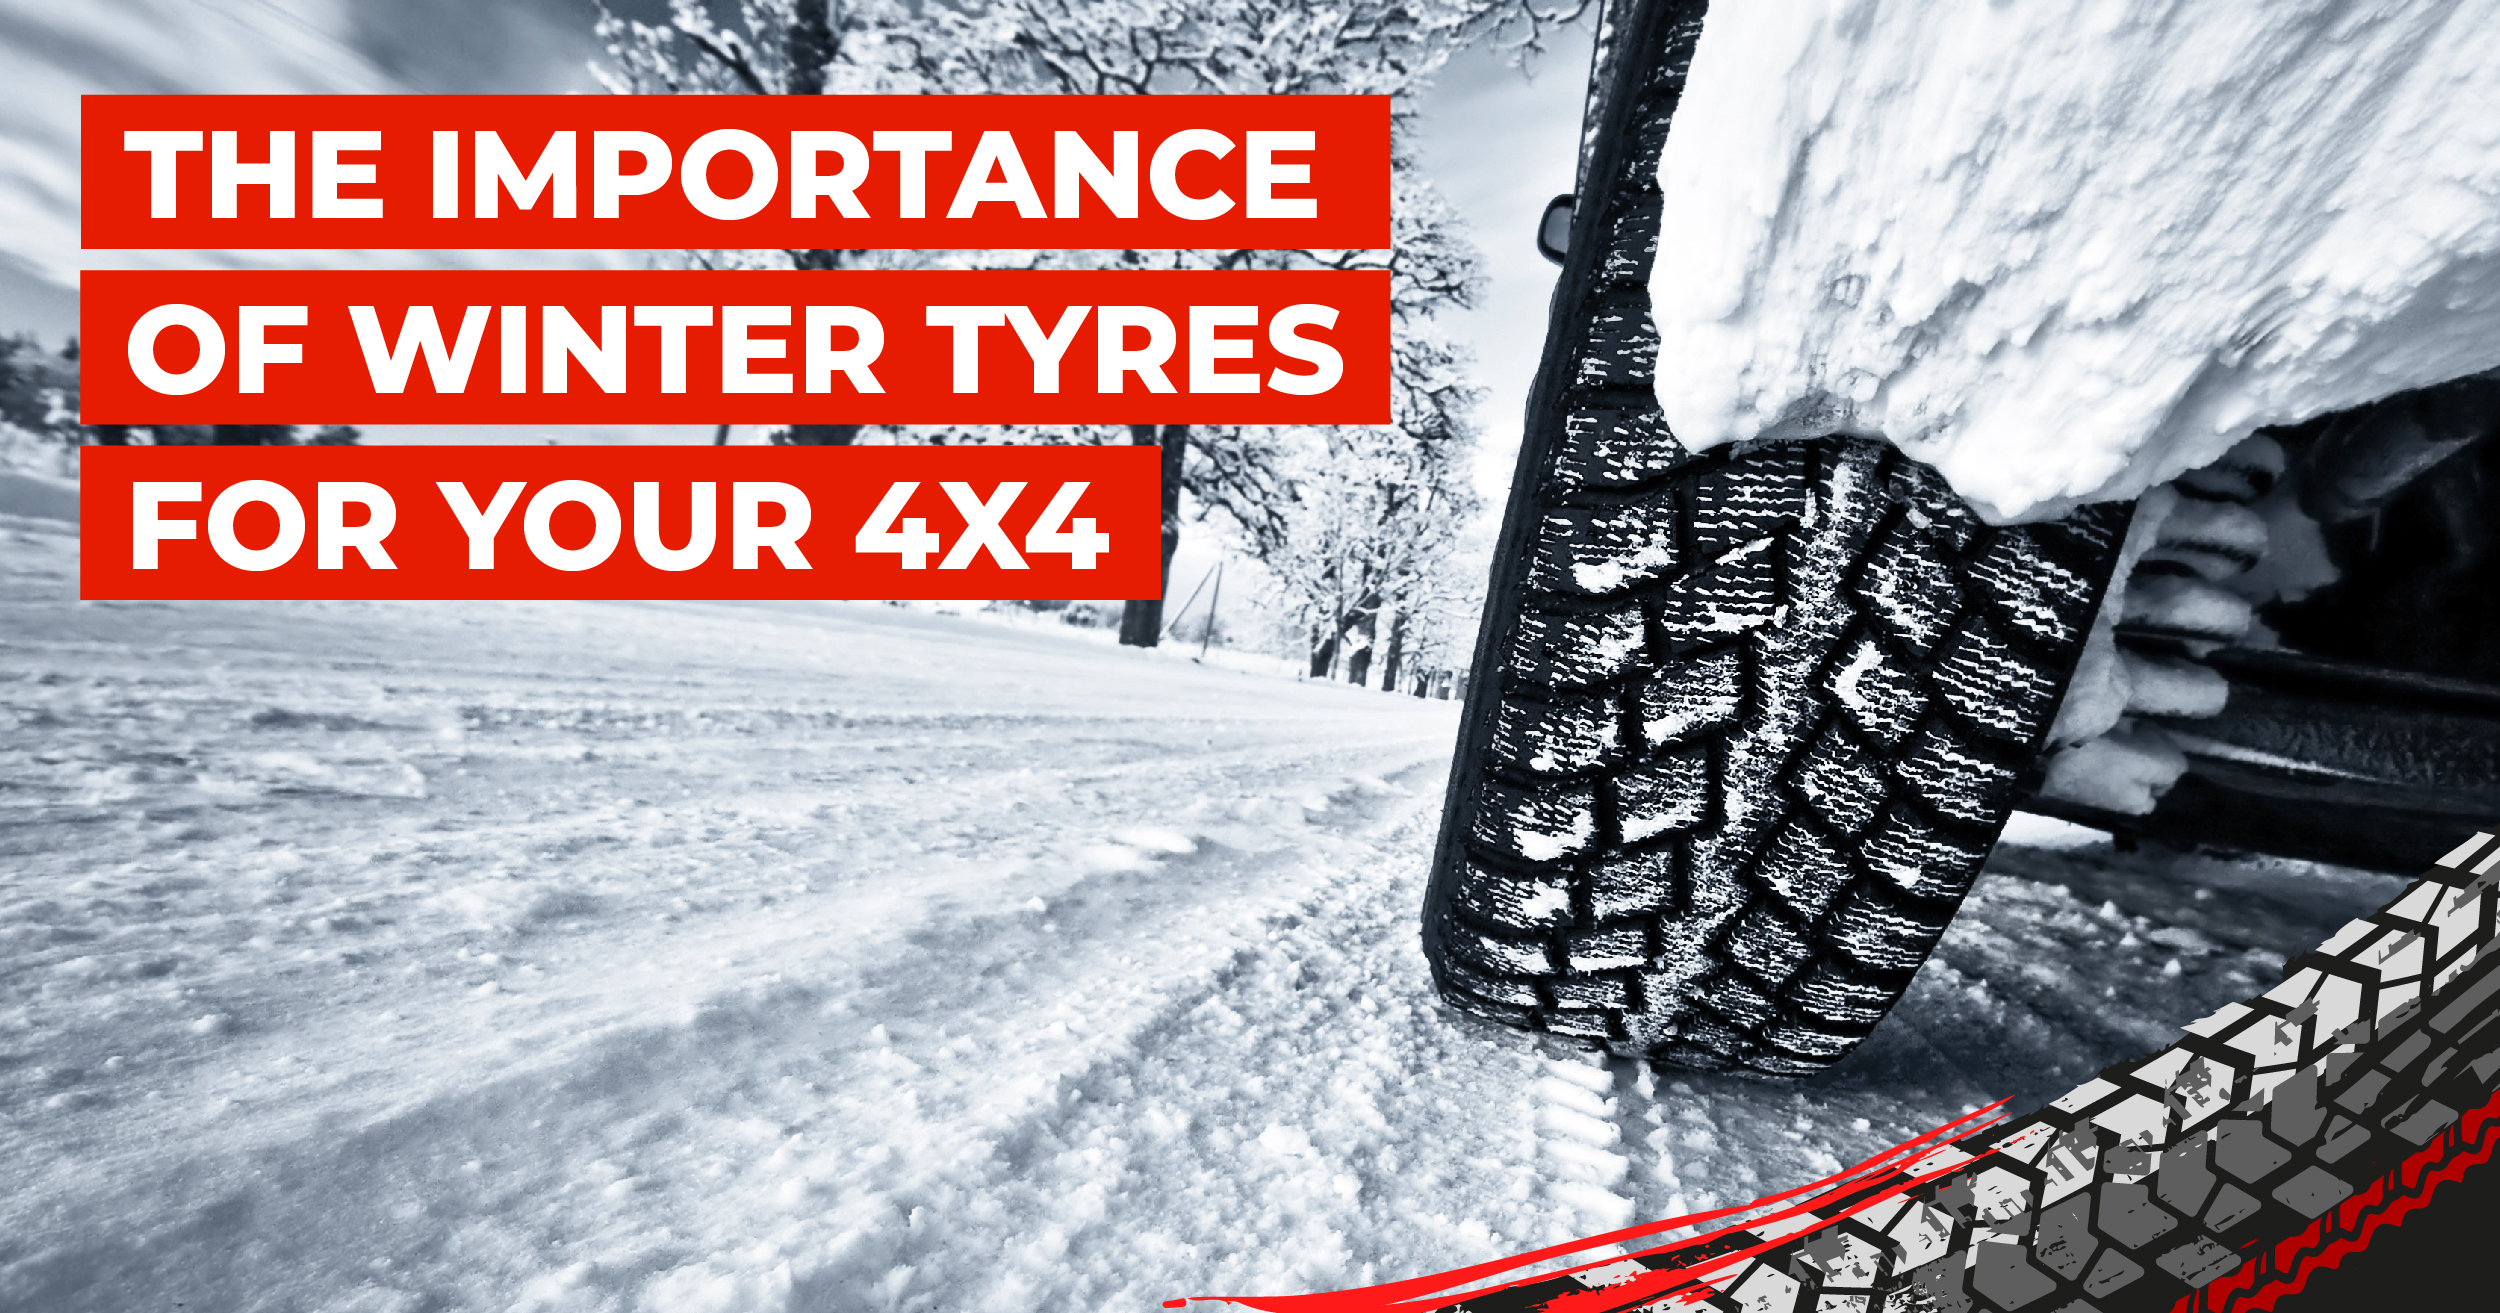 The Importance of Winter Tyres for Your 4x4